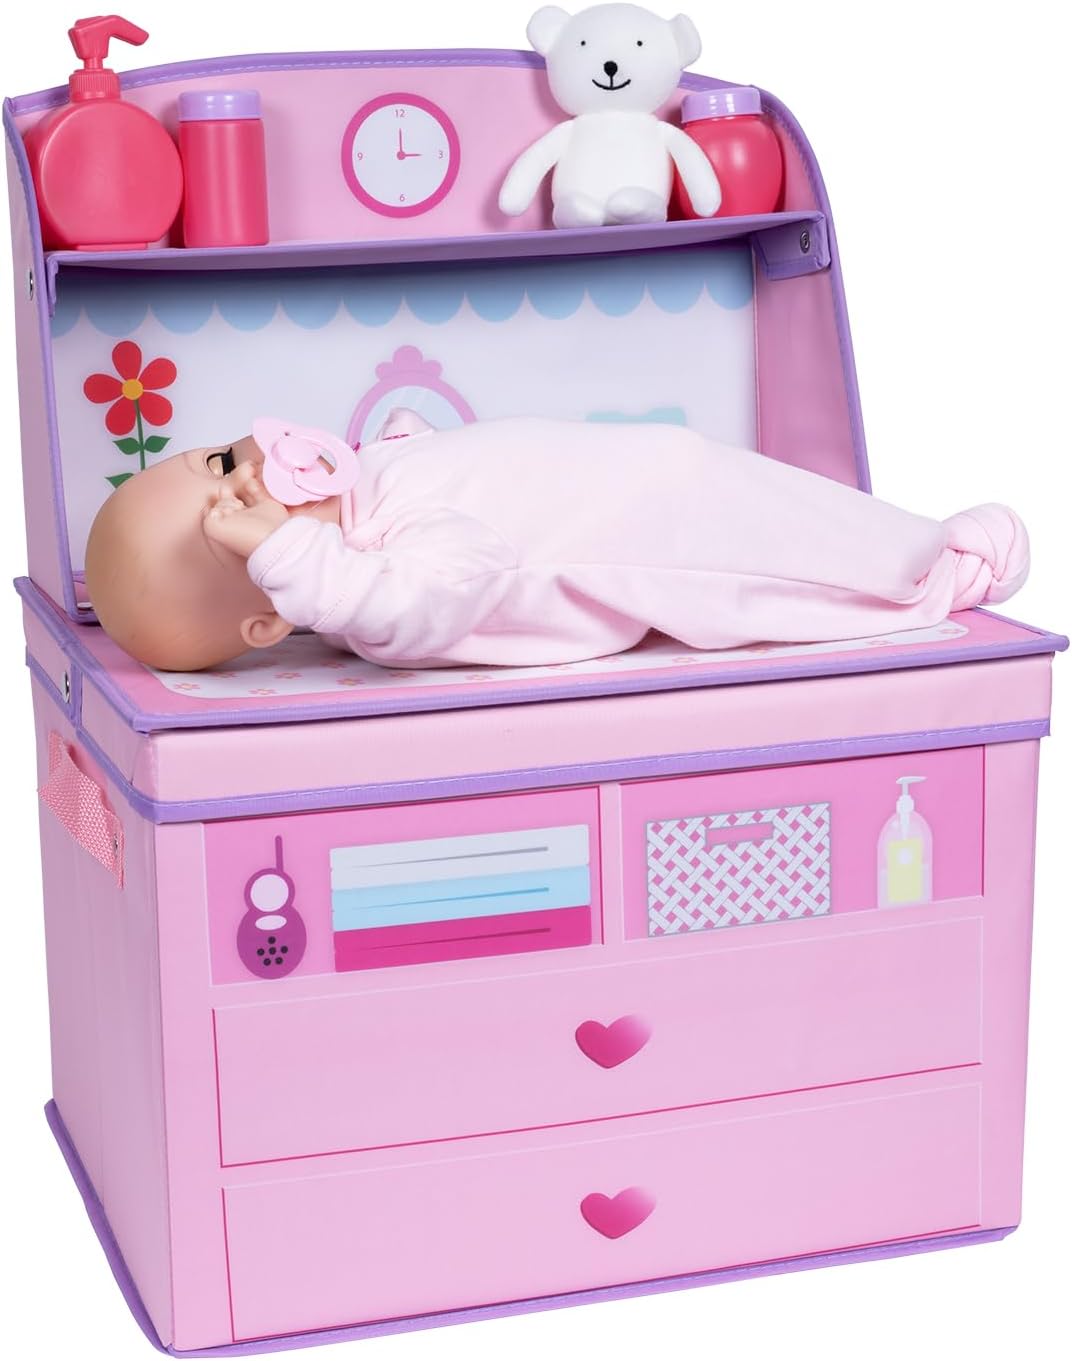 Perfectly Pink 10 Piece Baby Doll Changing Table Gift Set by Adora #24036